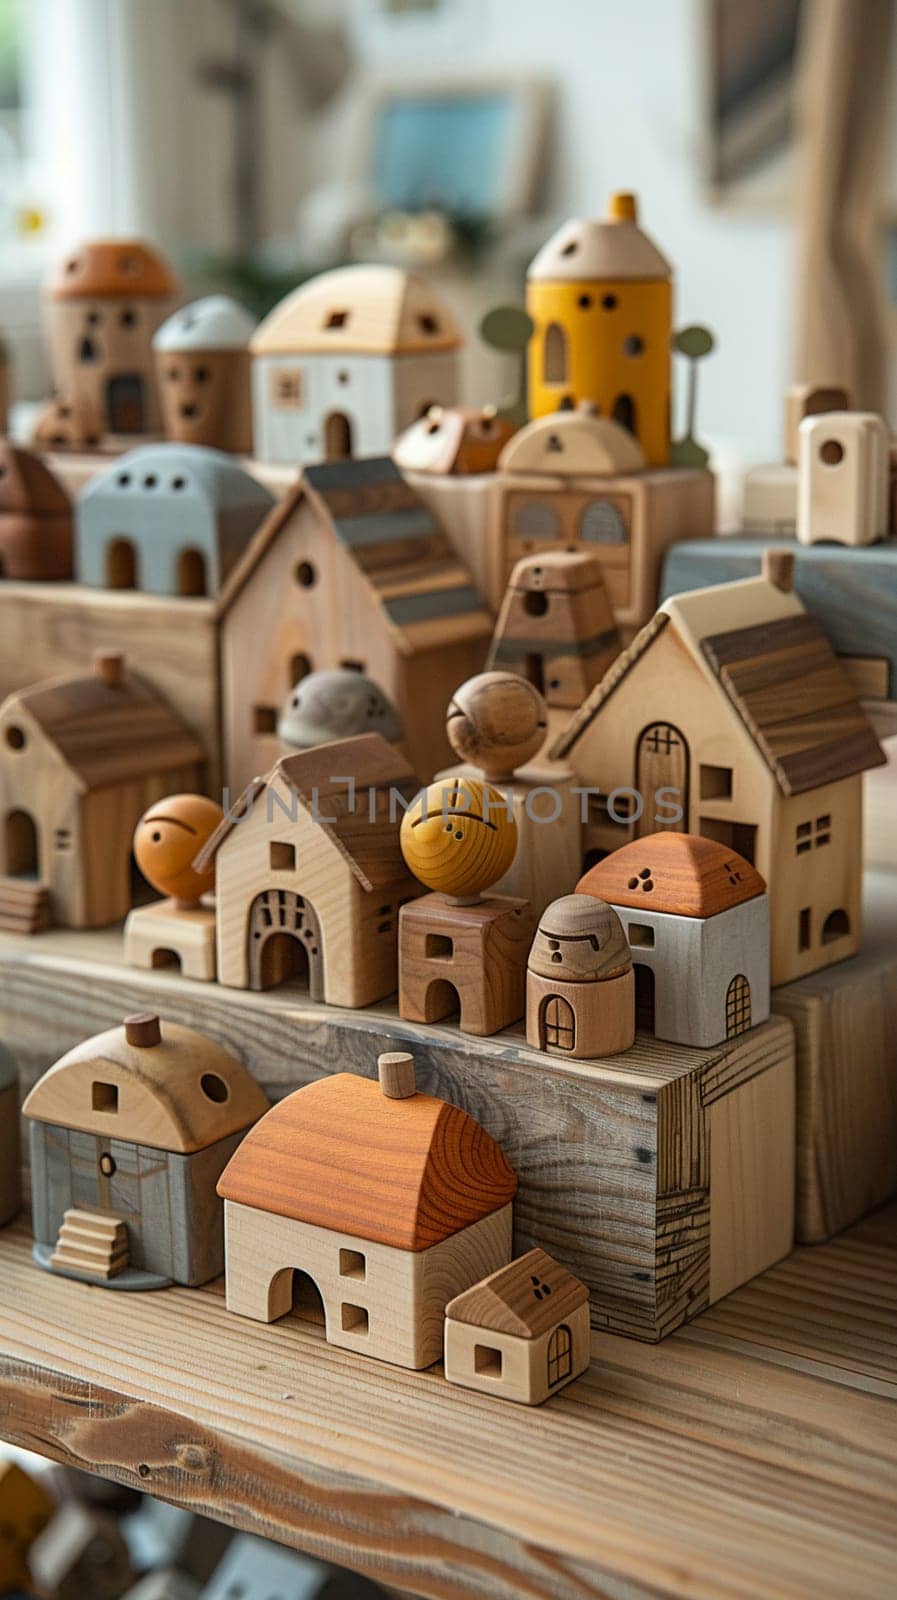 Wooden Toy Workshop Carves Childhood Memories in Business of Handcrafted Playthings, Wooden blocks and toy prototypes carve a story of childhood memories and handcrafted playthings in the wooden toy workshop business.